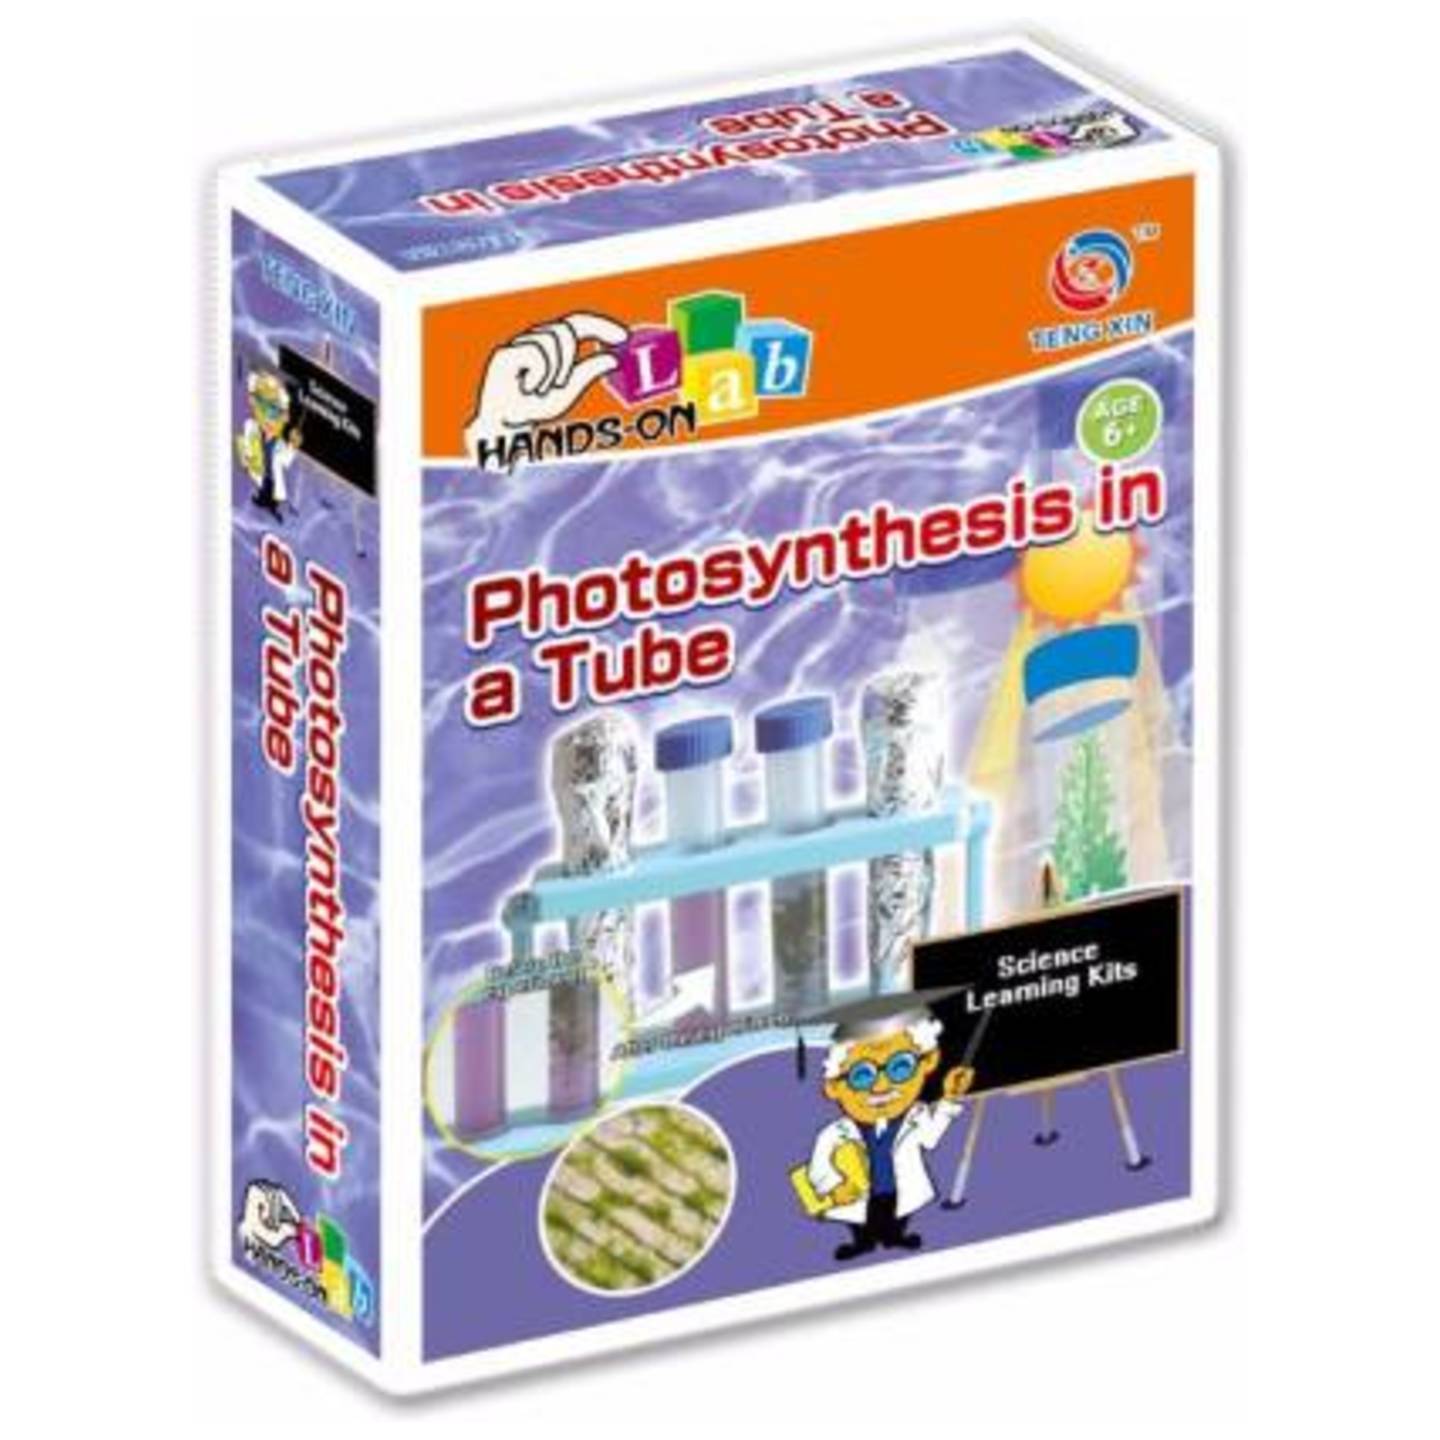 Photosynthesis in a Tube Science Learning Kit